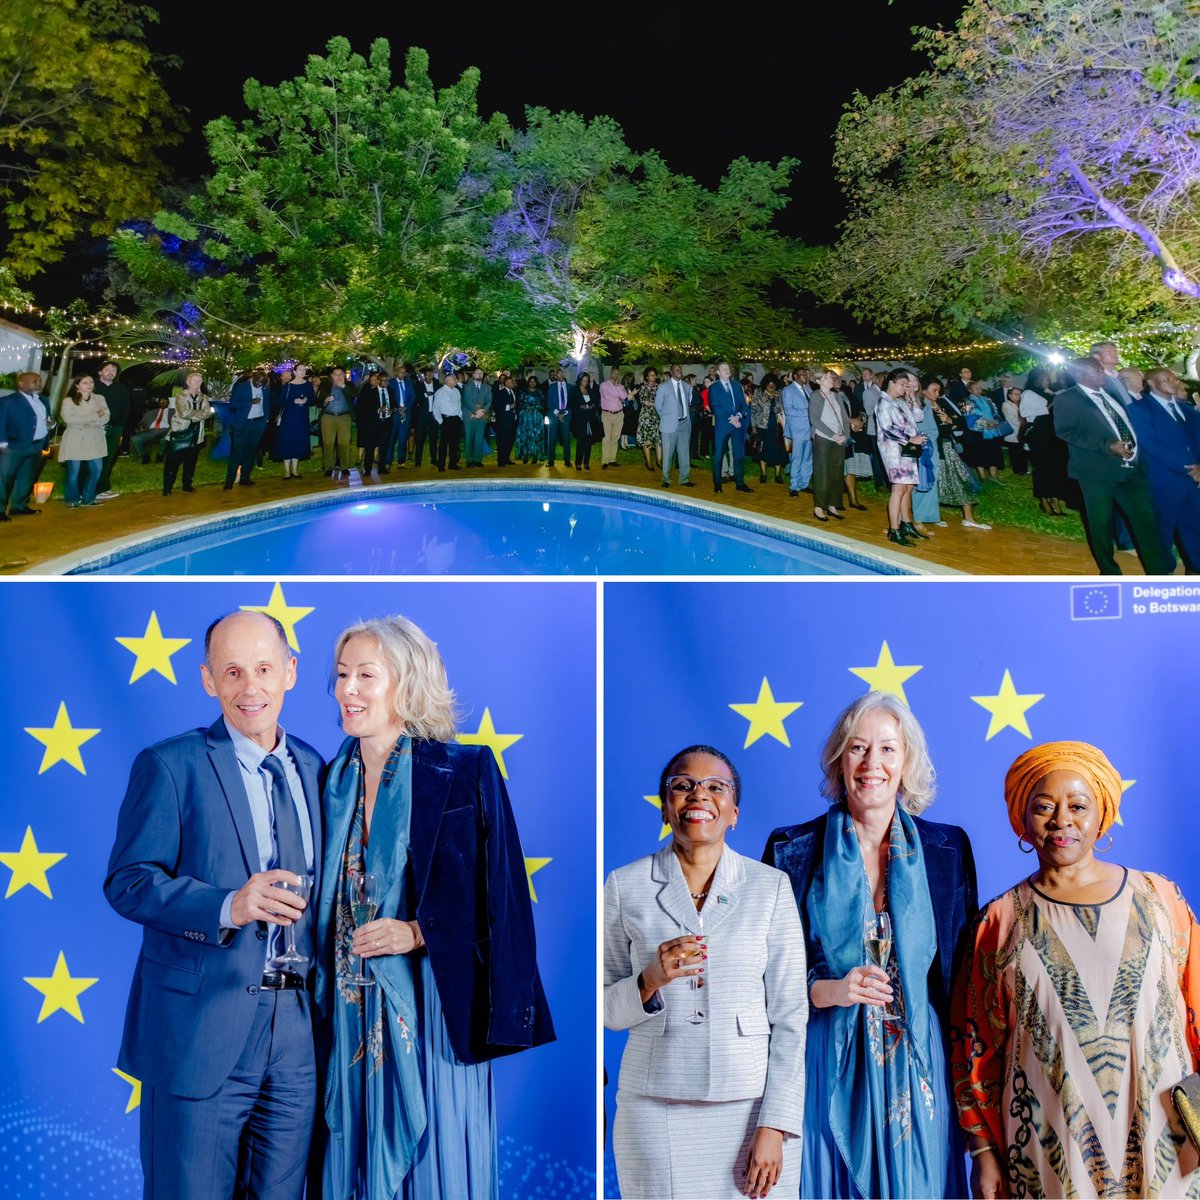 Thank you for joining the #EuropeDay celebration yesterday!

We dedicated this Europe Day to protection of biodiversity, conservation, livelihoods and green jobs as key pillars of our partnership with both Botswana and SADC.

🇪🇺 supports solutions that work for the people and 🌍